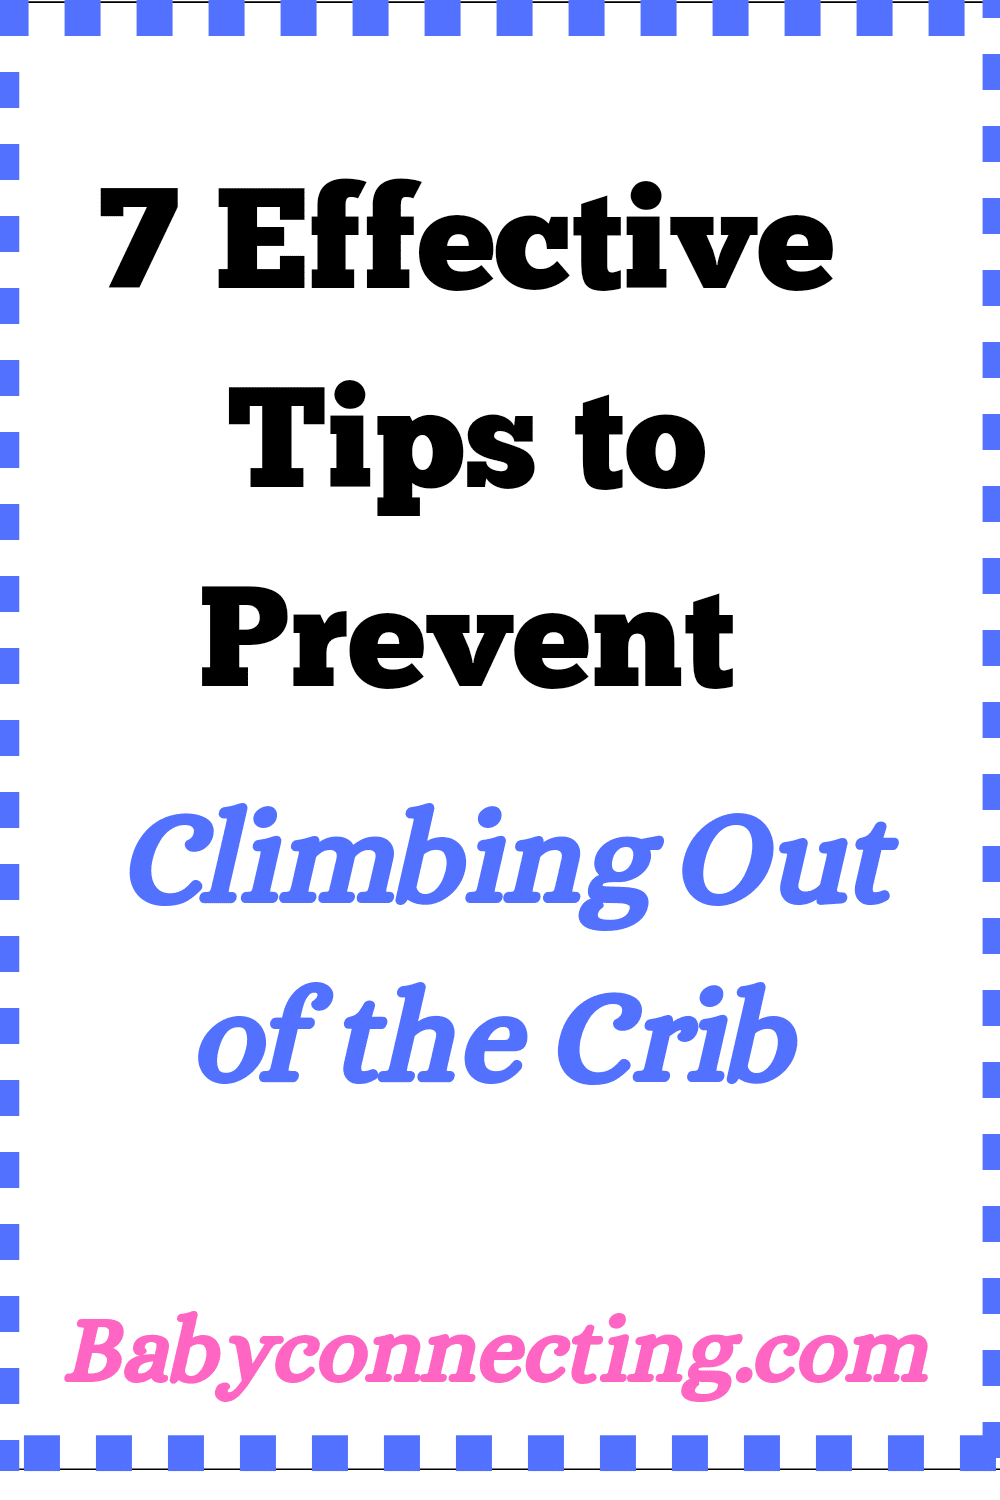 7 Effective Tips to Prevent Climbing Out of the Crib